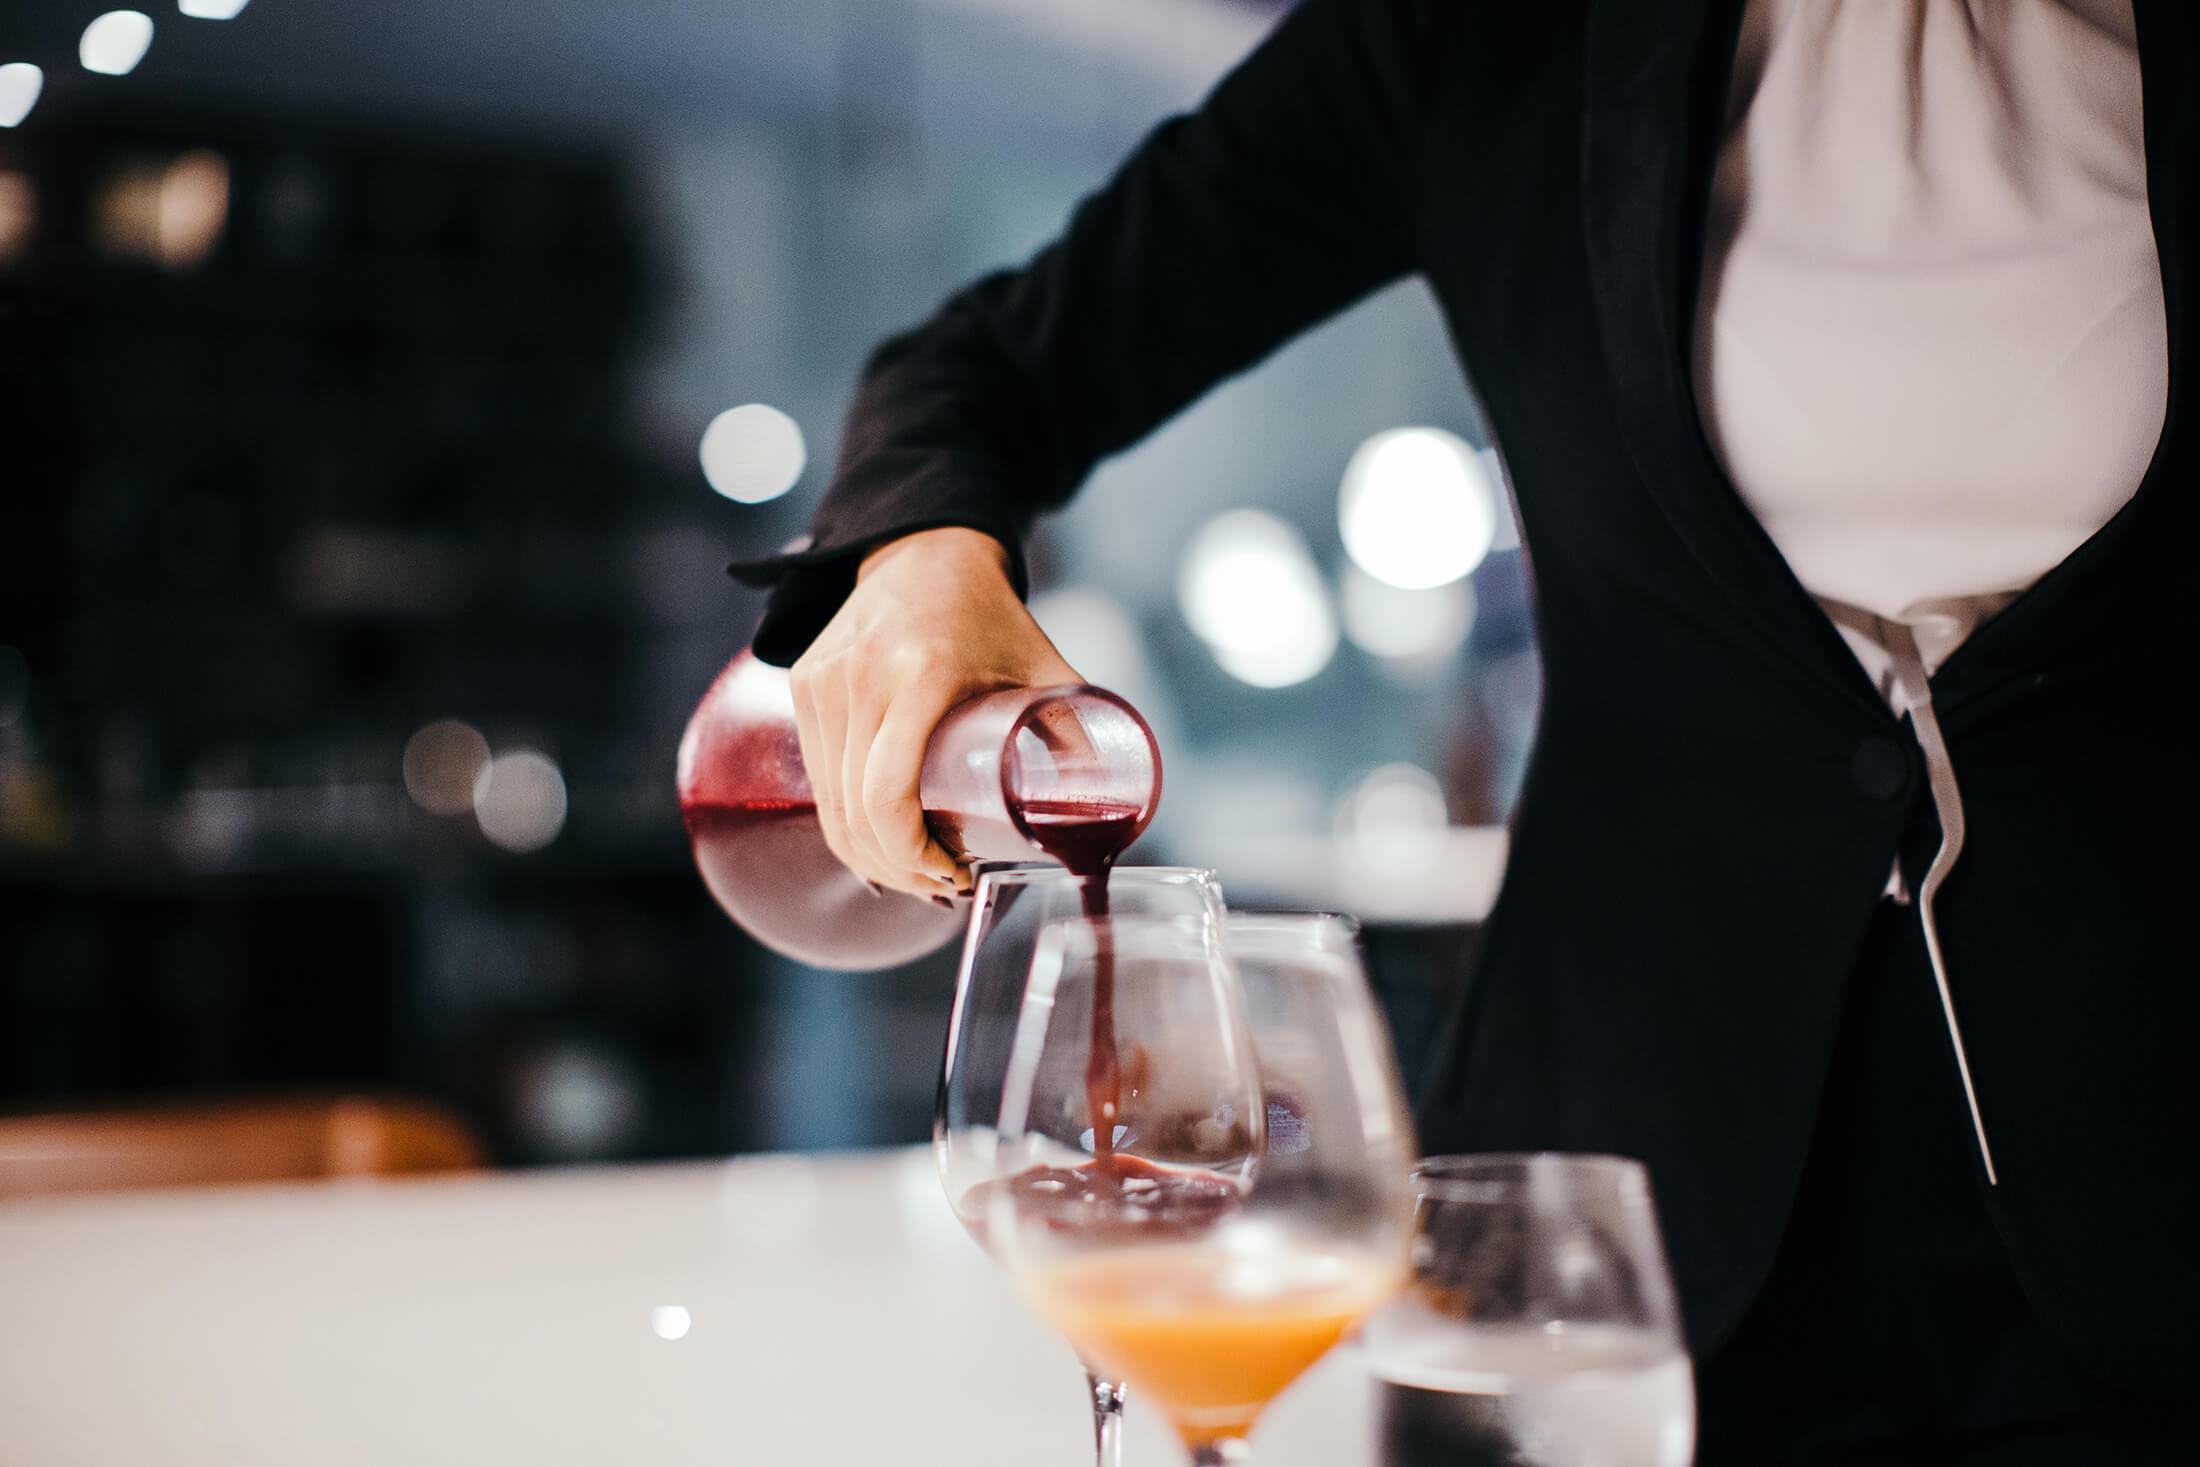 a person pouring wine into a glass